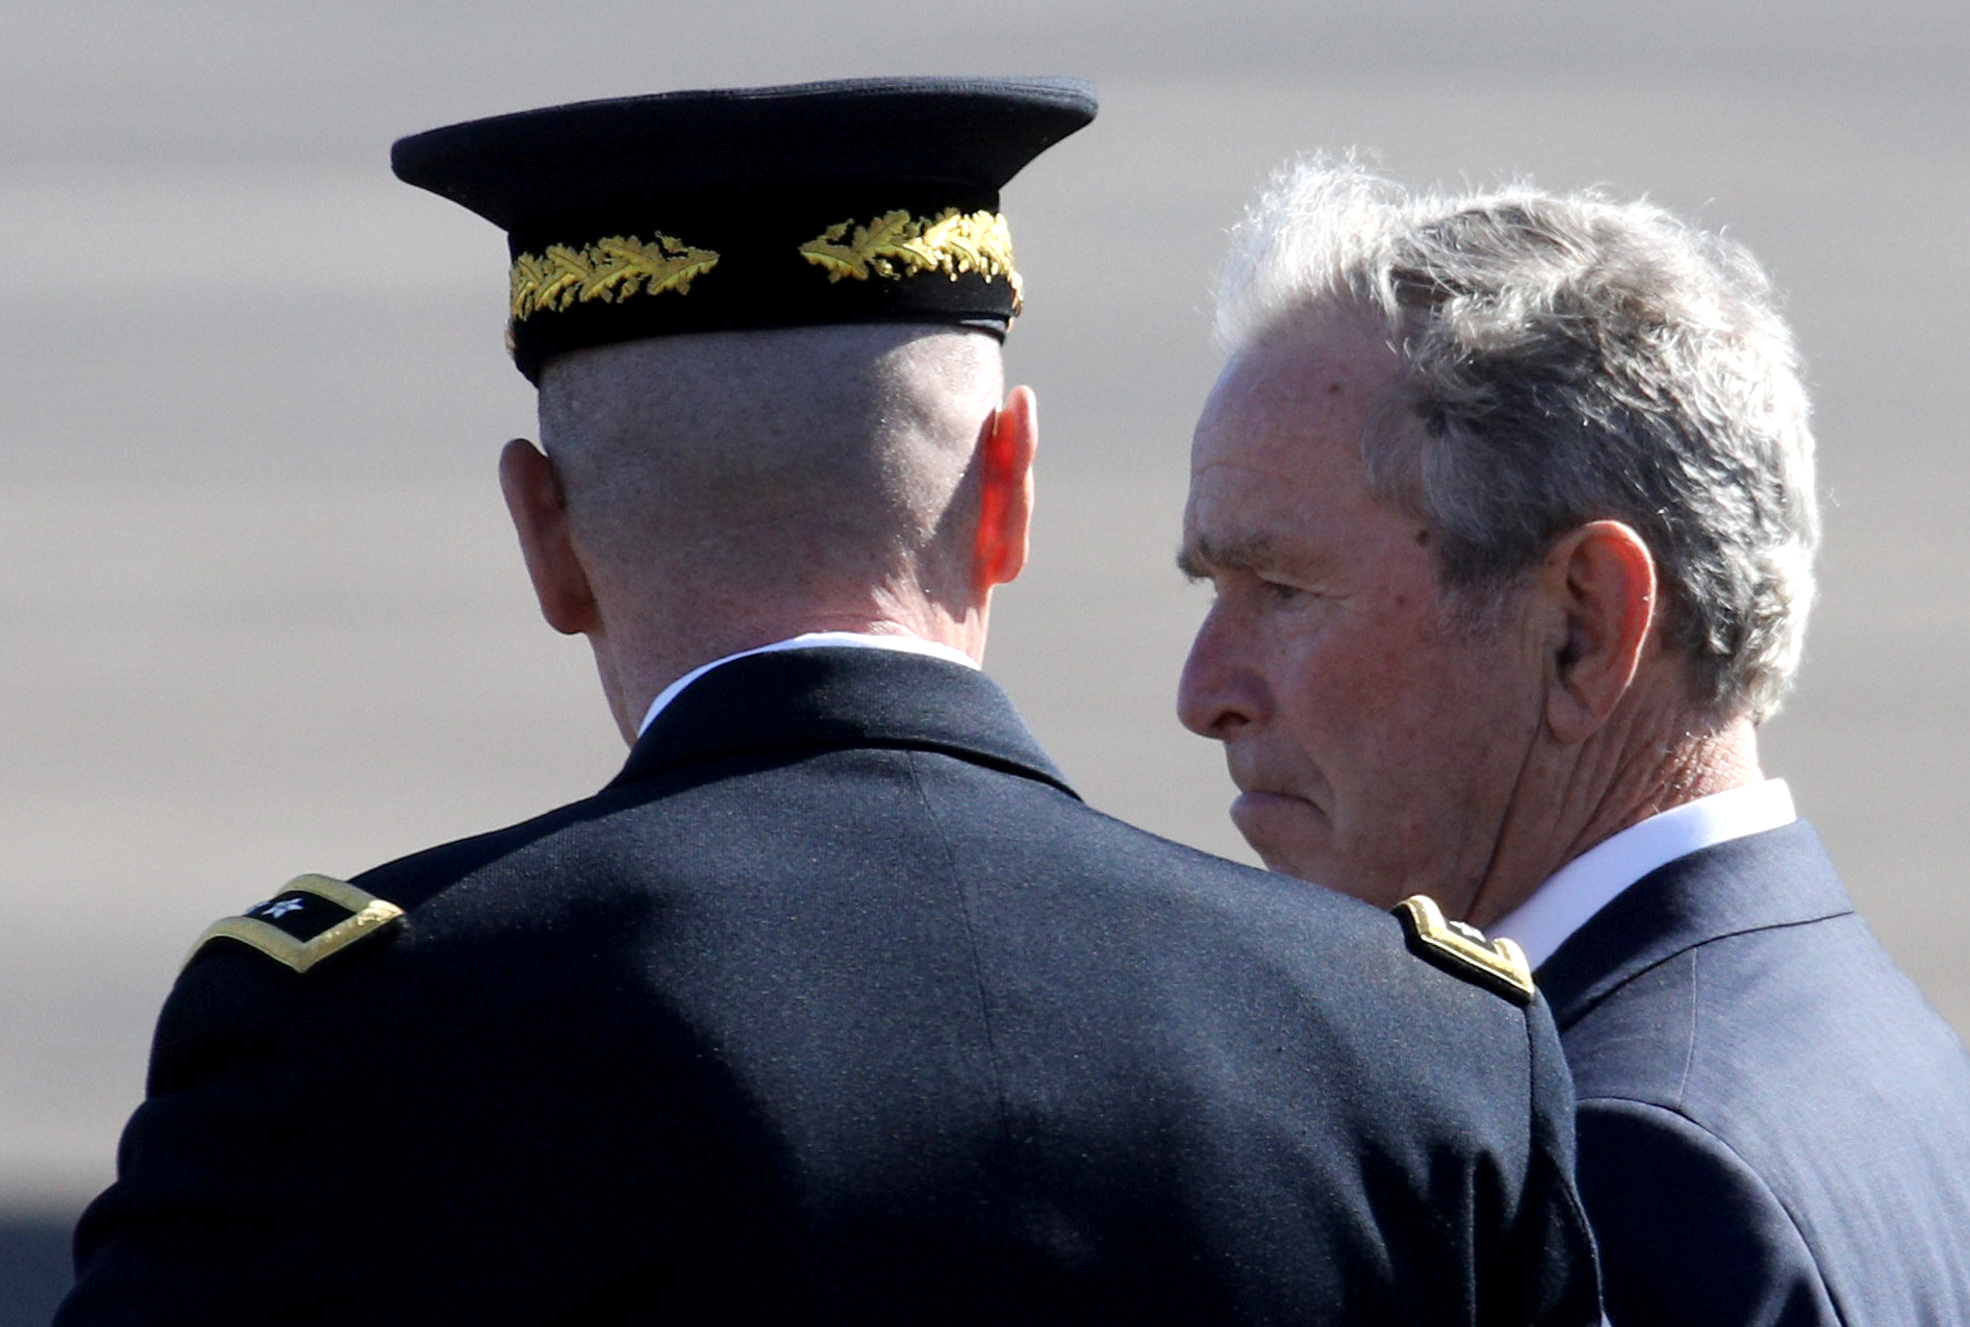 Former President George W. Bush takes part in a departure ceremony in which George H.W. Bush's casket was put on the Special Air Mission 41 plane at Ellington Field Joint Reserve Base in Houston, Texas, U.S., December 3, 2018. (REUTERS/Loren Elliott)